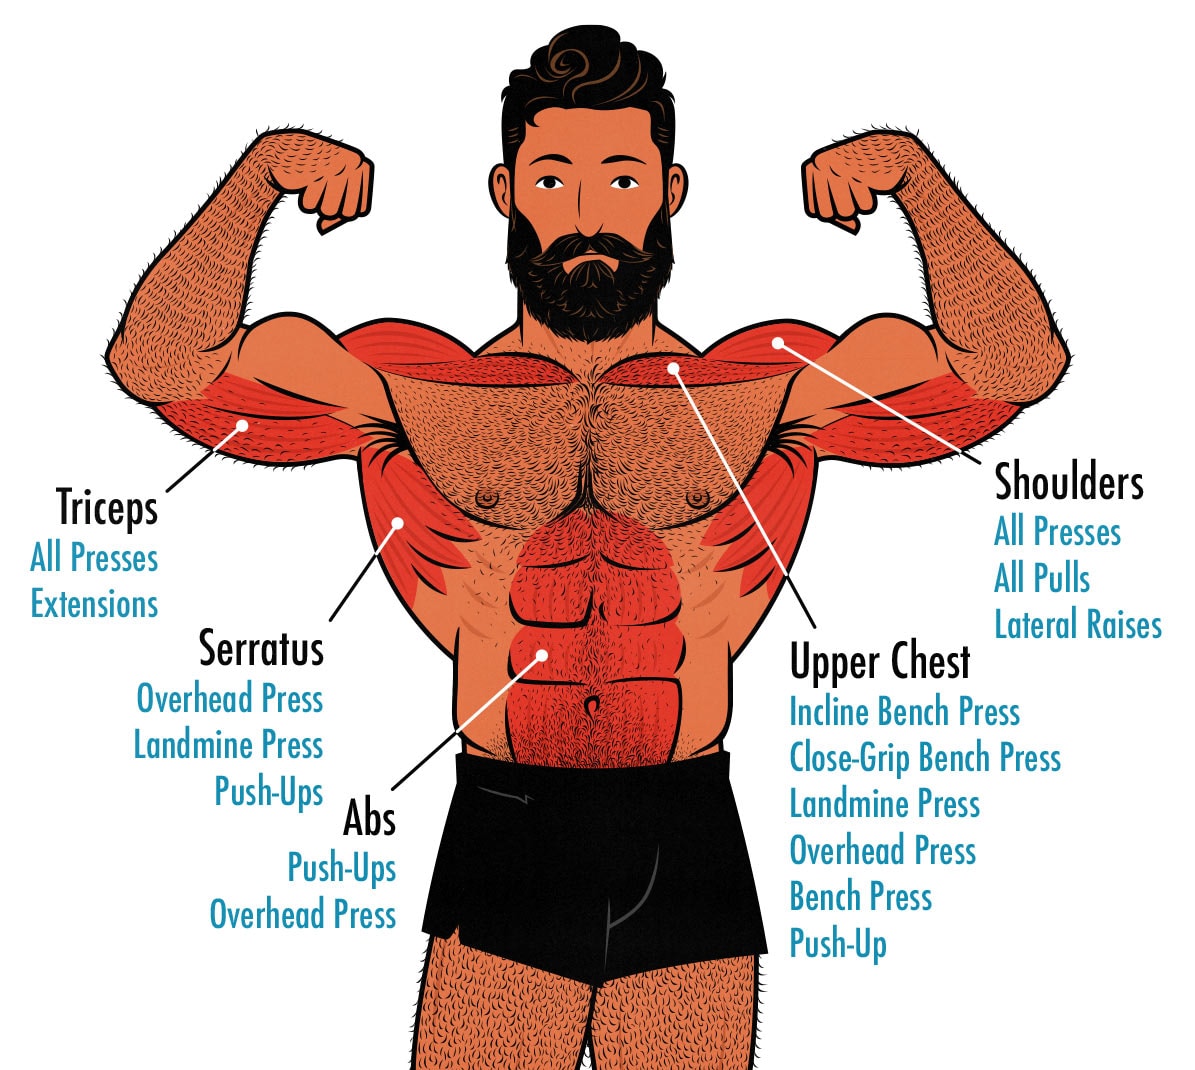 Diagram showing the muscles worked during Shoulder Day workouts.